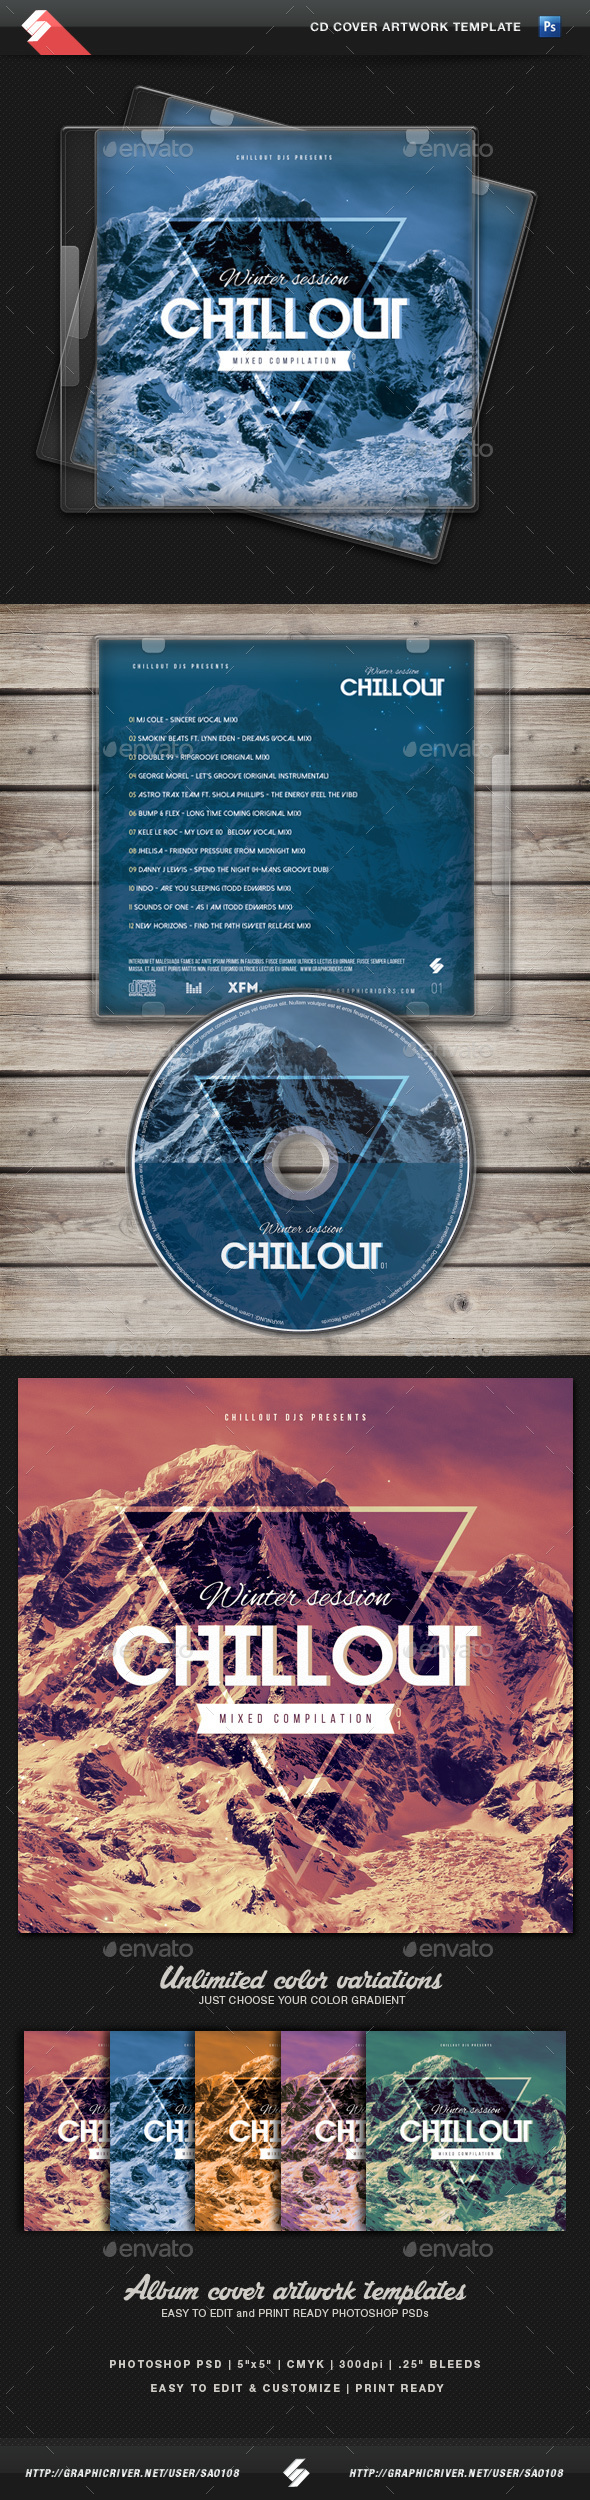 Winter Chillout Cd Cover Artwork Template By Sao108 Graphicriver